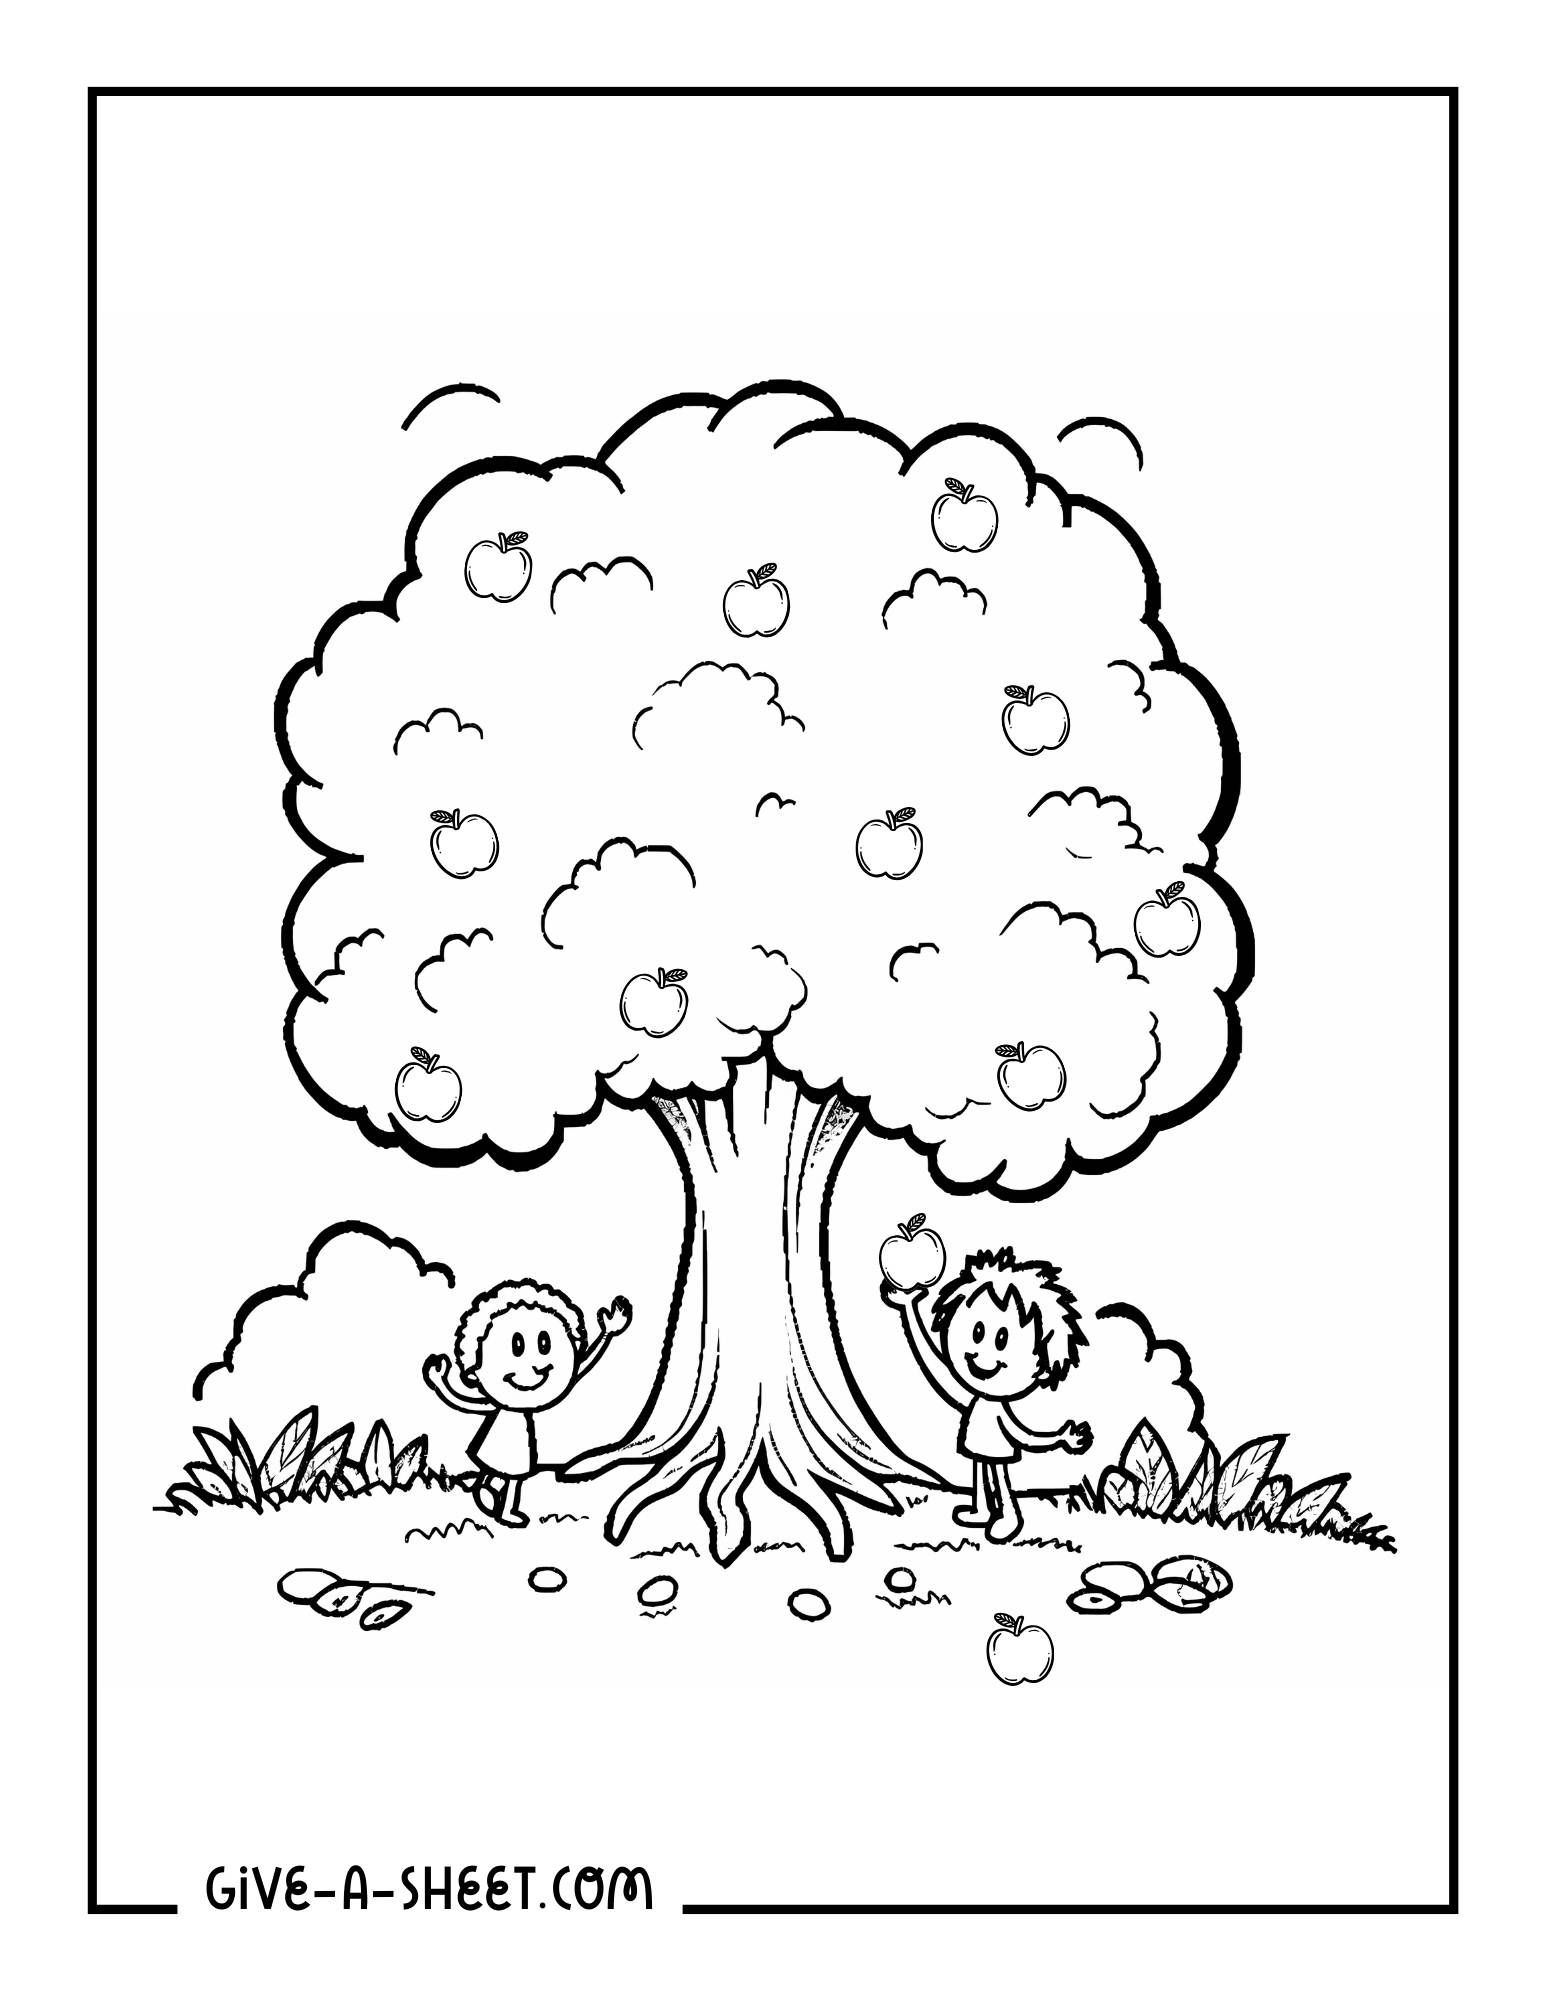 Apple fruit trees coloring page for kids.